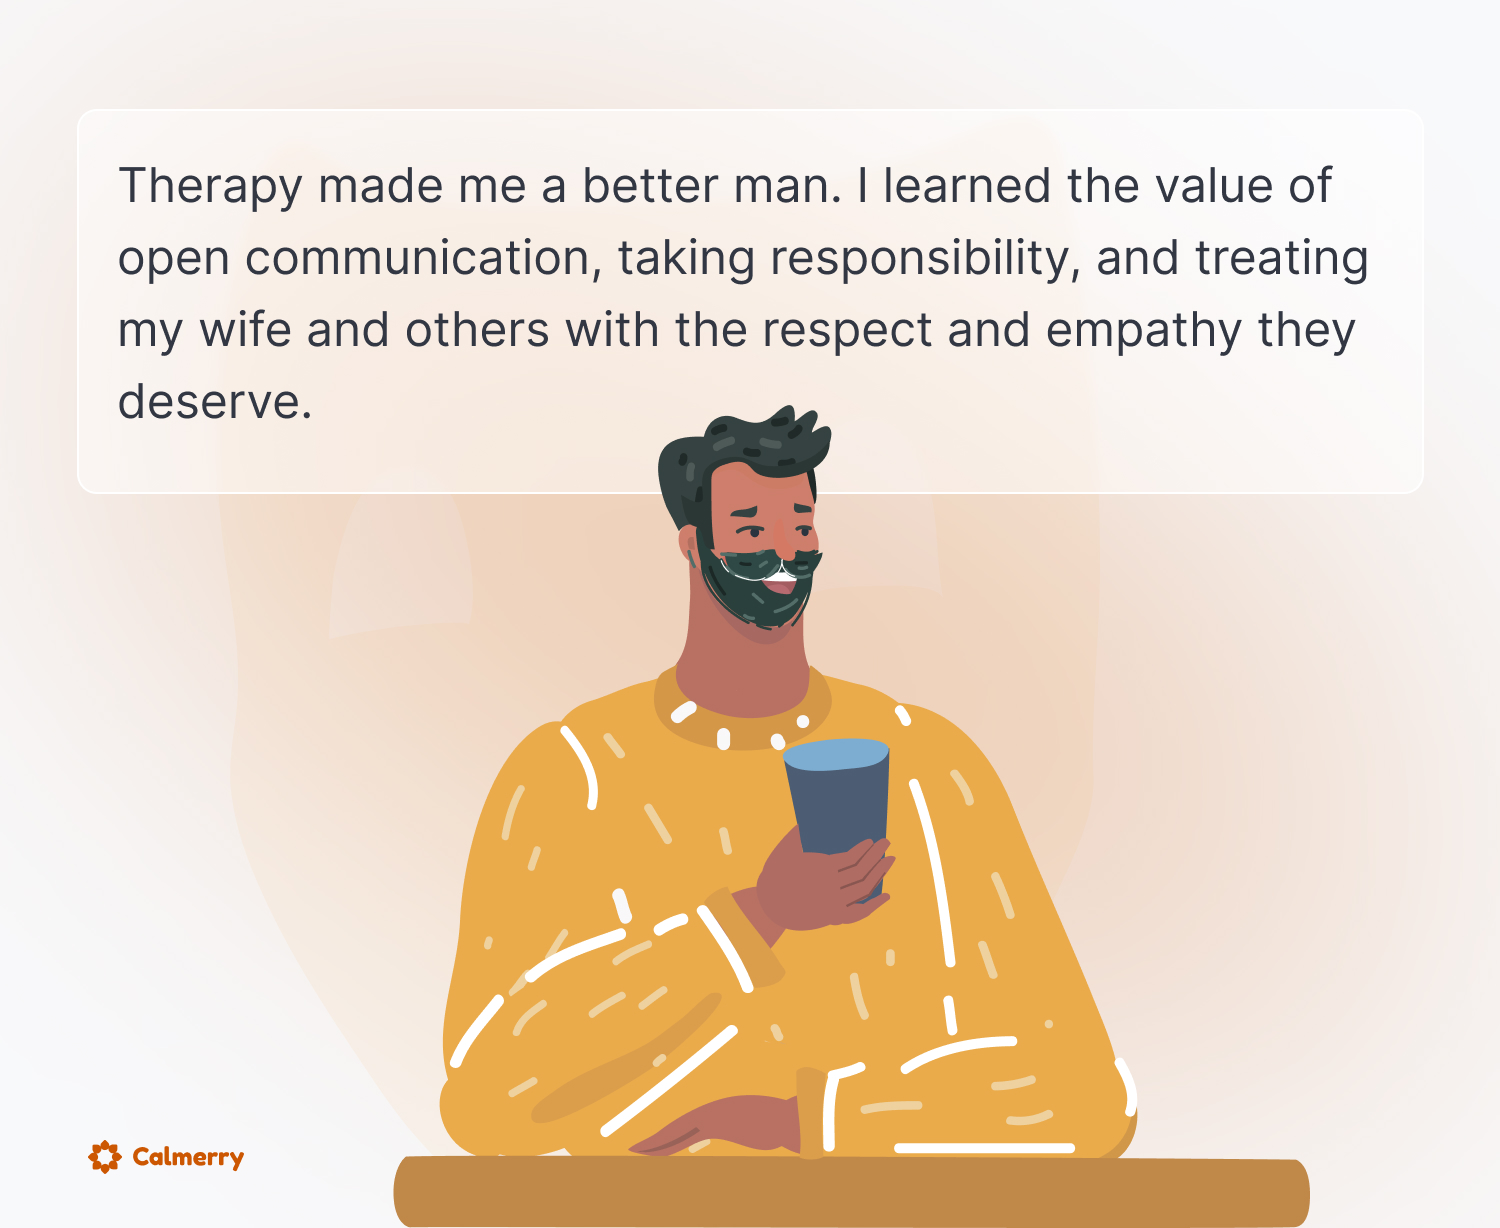 An illustration from 'Calmerry' showing a content man in a yellow sweater holding a coffee cup. The accompanying text speaks of personal growth, mentioning how therapy taught him the importance of open communication, responsibility, and empathy towards his wife and others.